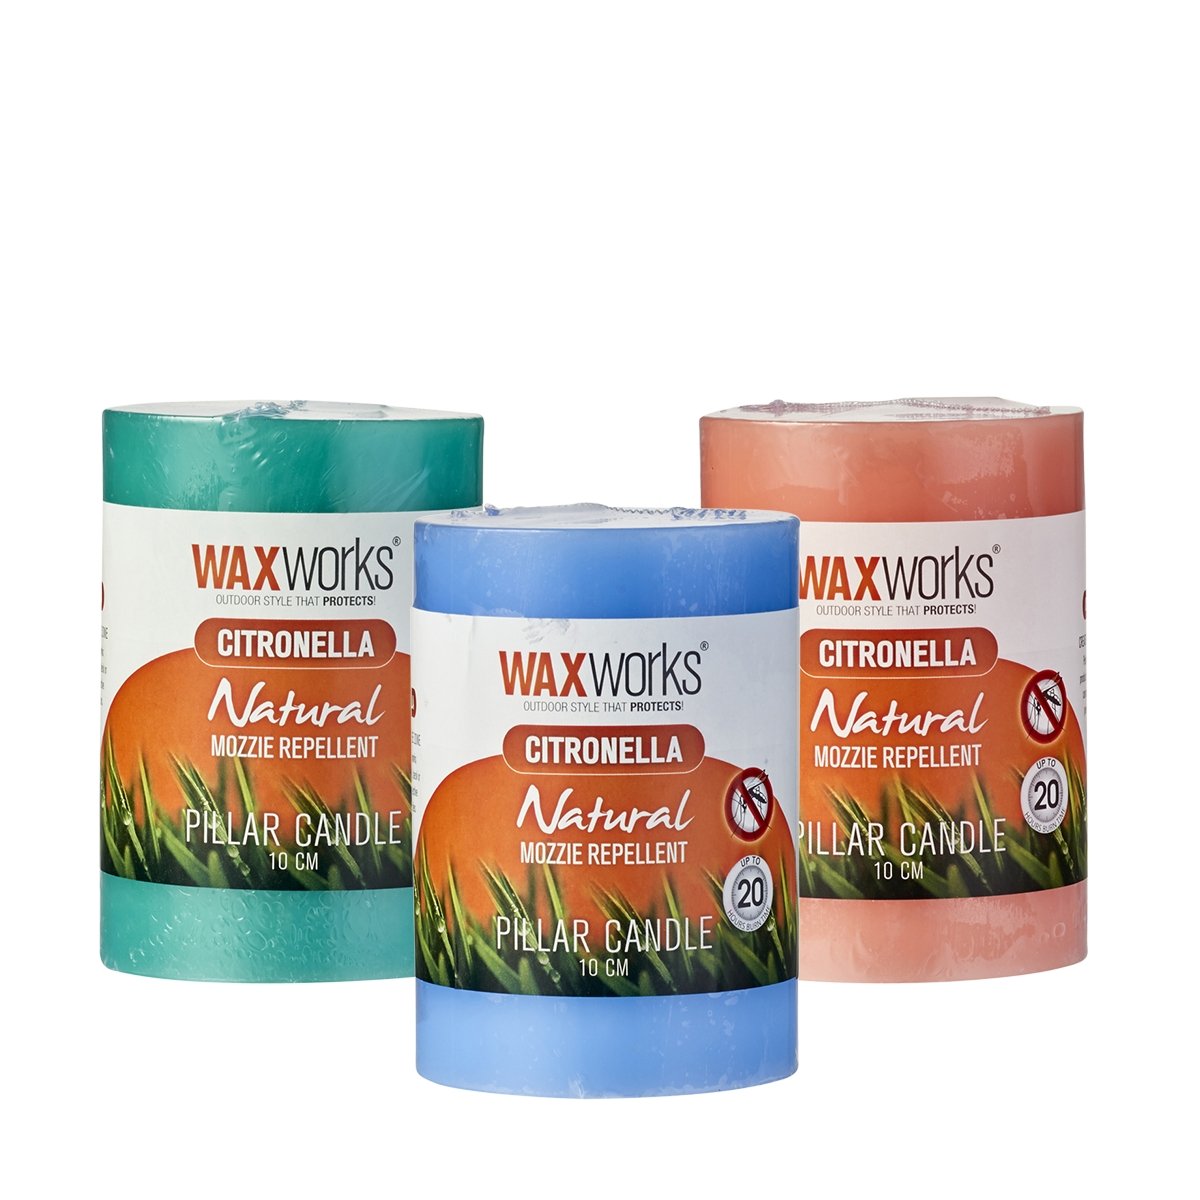 WAXworks Citronella Natural Mozzie Repellent Pillar Candle 75mmX100mm WW933 - Double Bay Hardware